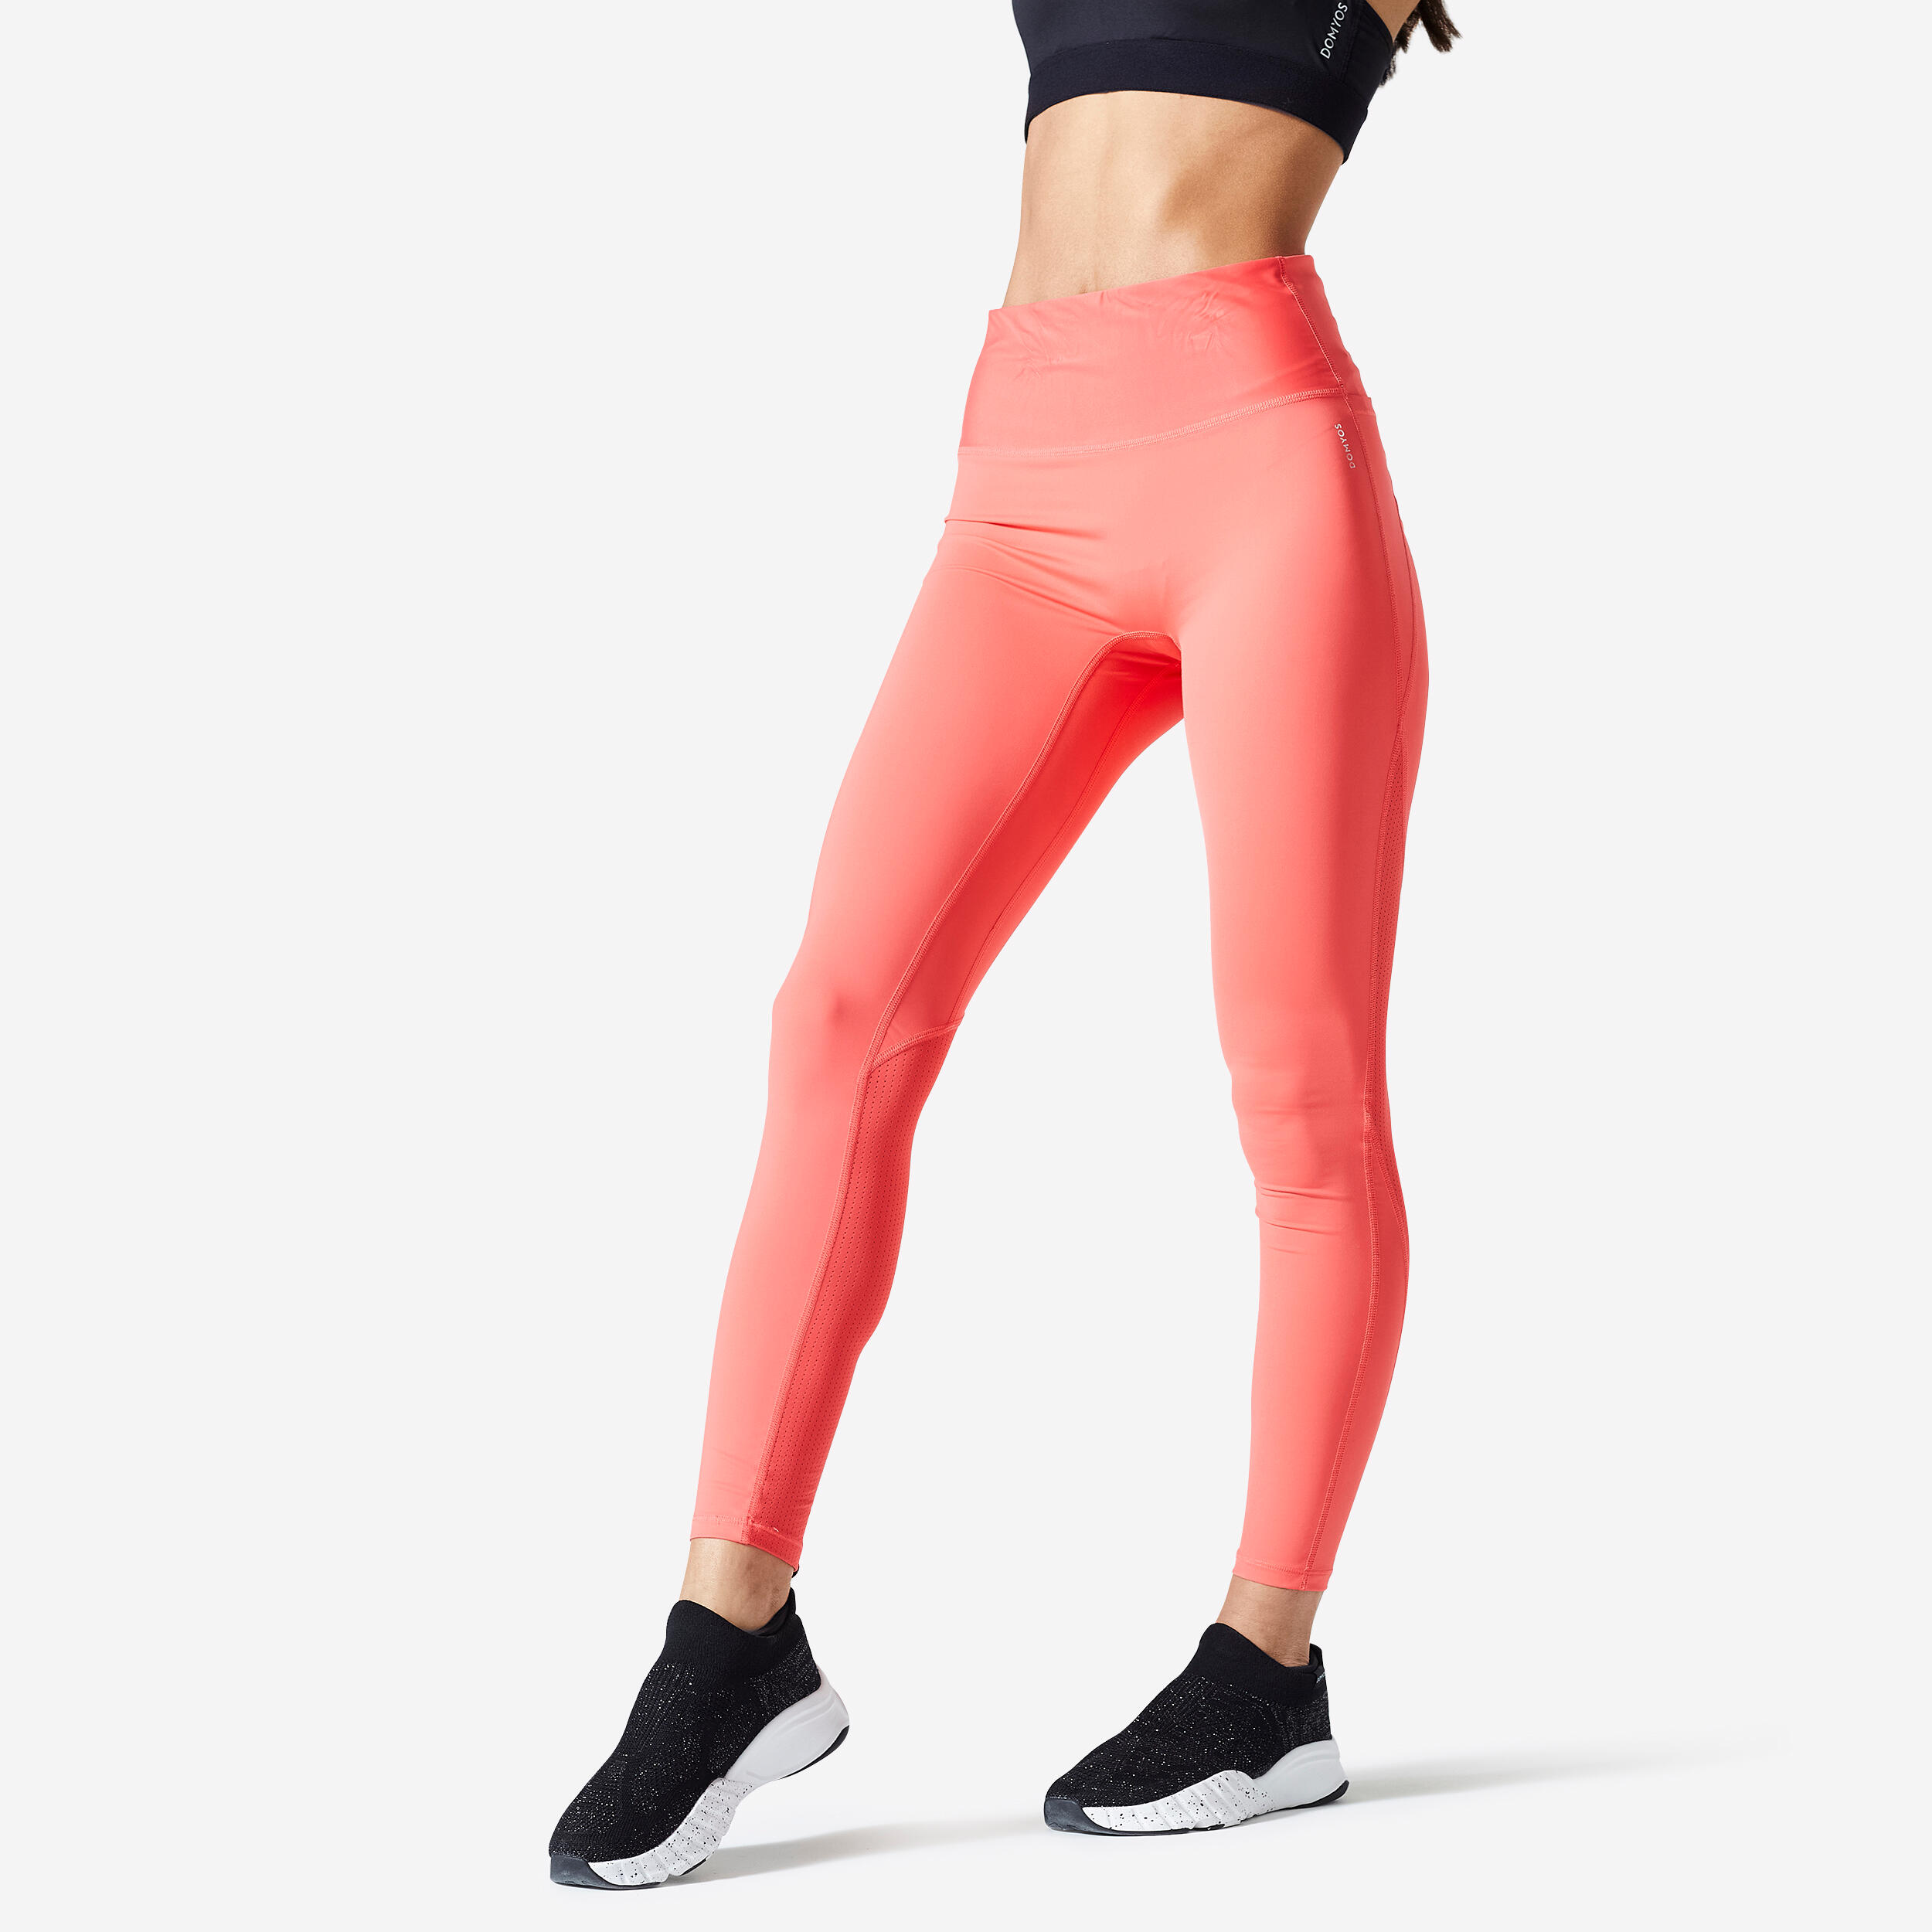 Are Fabletics Leggings Breathable